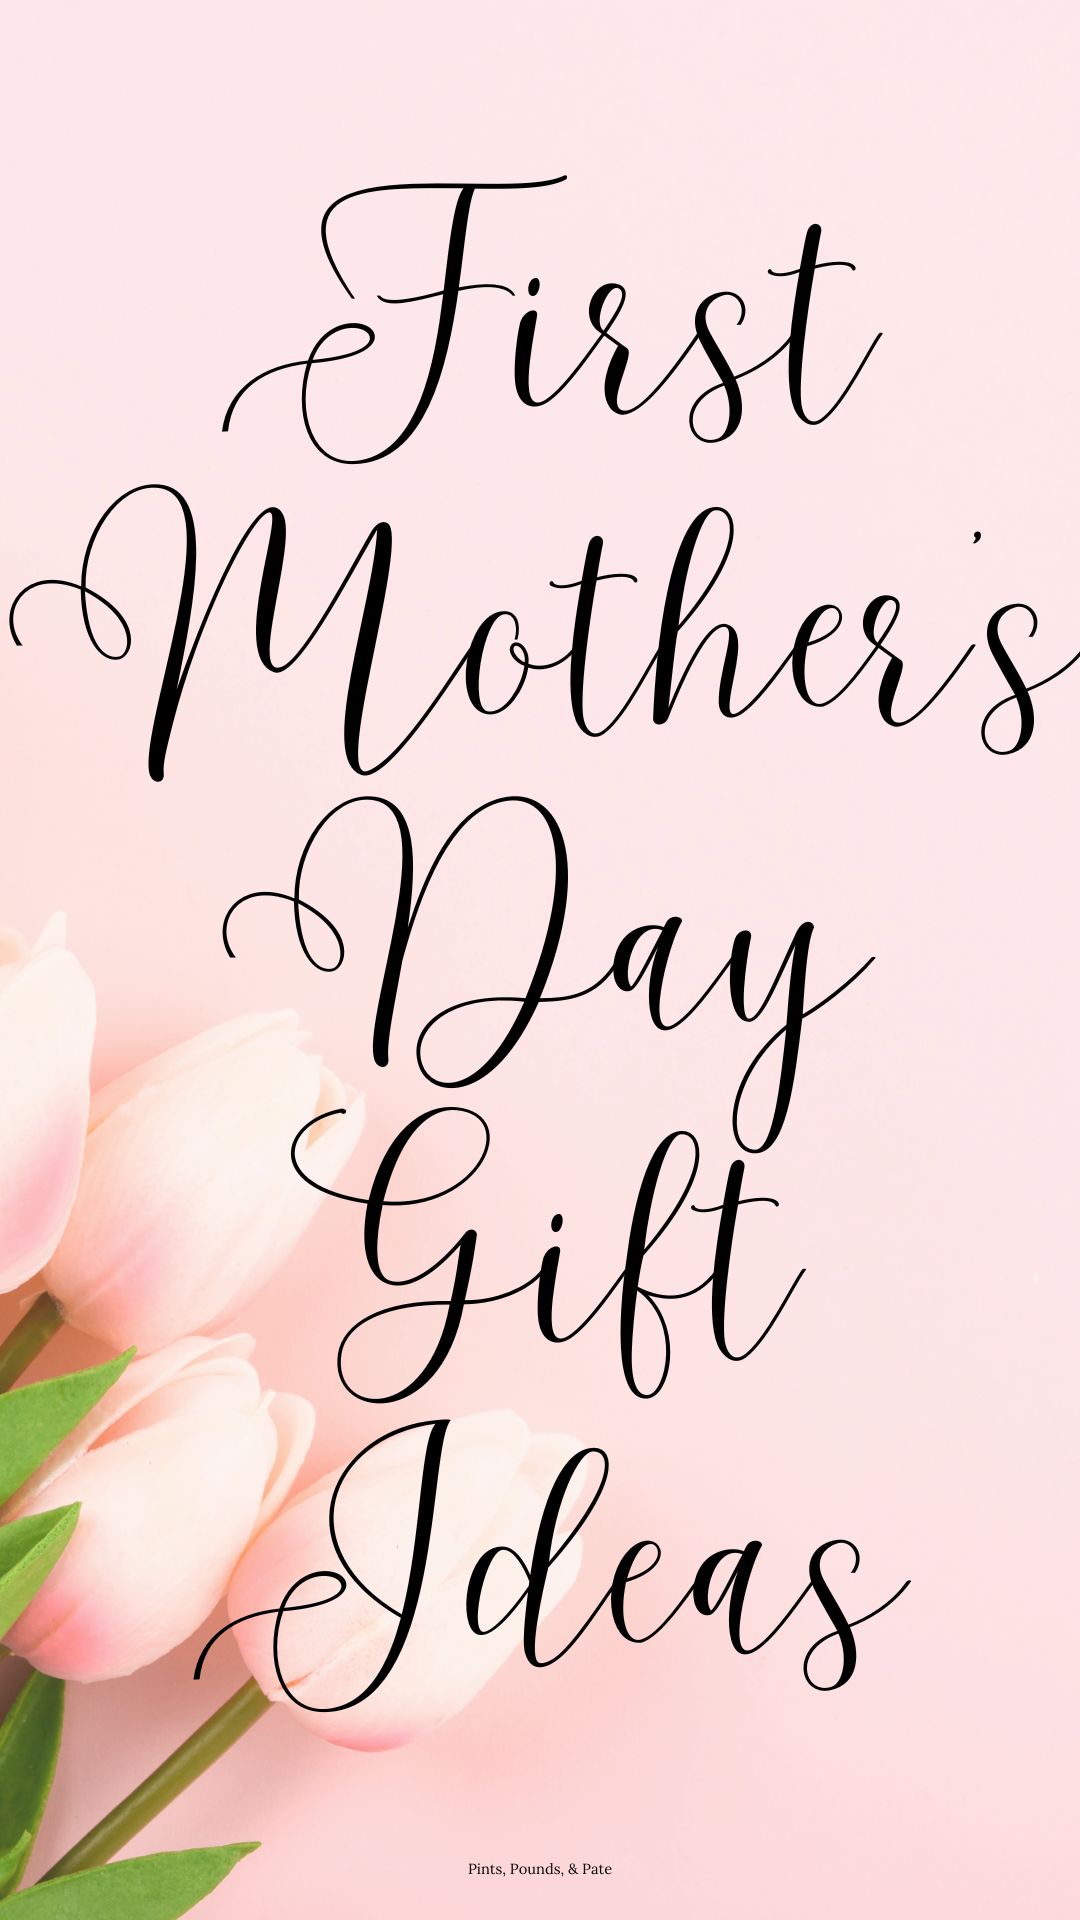 First Mother's Day Gift Ideas